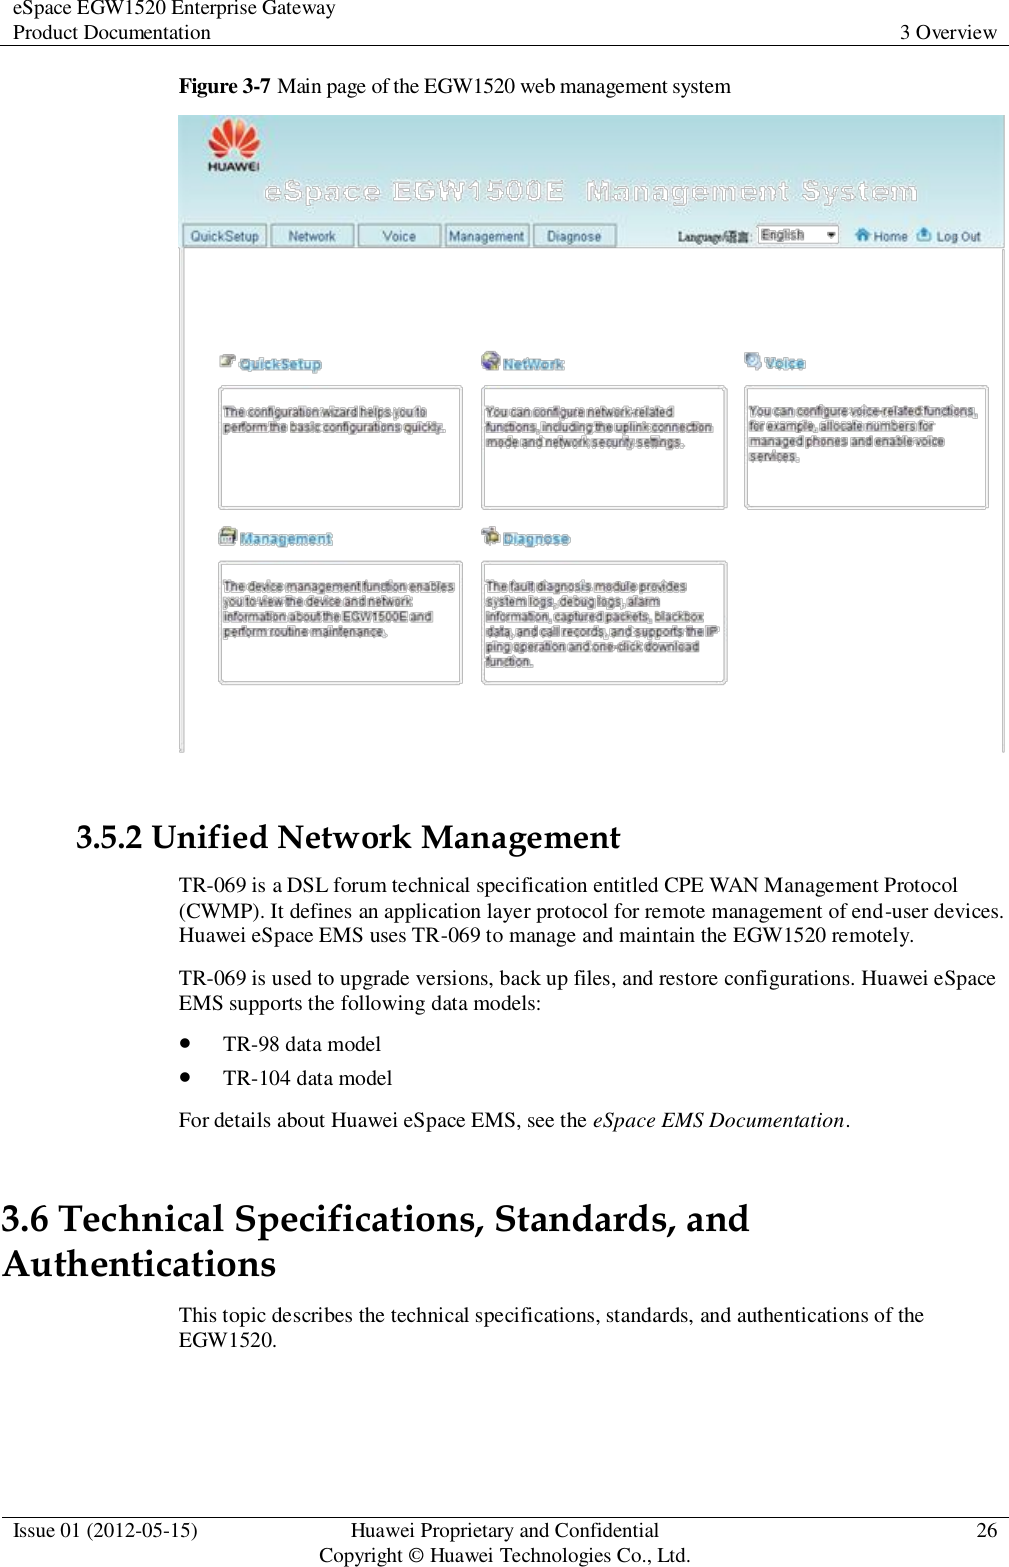 eSpace EGW1520 Enterprise Gateway Product Documentation 3 Overview  Issue 01 (2012-05-15) Huawei Proprietary and Confidential                                     Copyright © Huawei Technologies Co., Ltd. 26  Figure 3-7 Main page of the EGW1520 web management system   3.5.2 Unified Network Management TR-069 is a DSL forum technical specification entitled CPE WAN Management Protocol (CWMP). It defines an application layer protocol for remote management of end-user devices. Huawei eSpace EMS uses TR-069 to manage and maintain the EGW1520 remotely. TR-069 is used to upgrade versions, back up files, and restore configurations. Huawei eSpace EMS supports the following data models:  TR-98 data model  TR-104 data model For details about Huawei eSpace EMS, see the eSpace EMS Documentation. 3.6 Technical Specifications, Standards, and Authentications This topic describes the technical specifications, standards, and authentications of the EGW1520. 